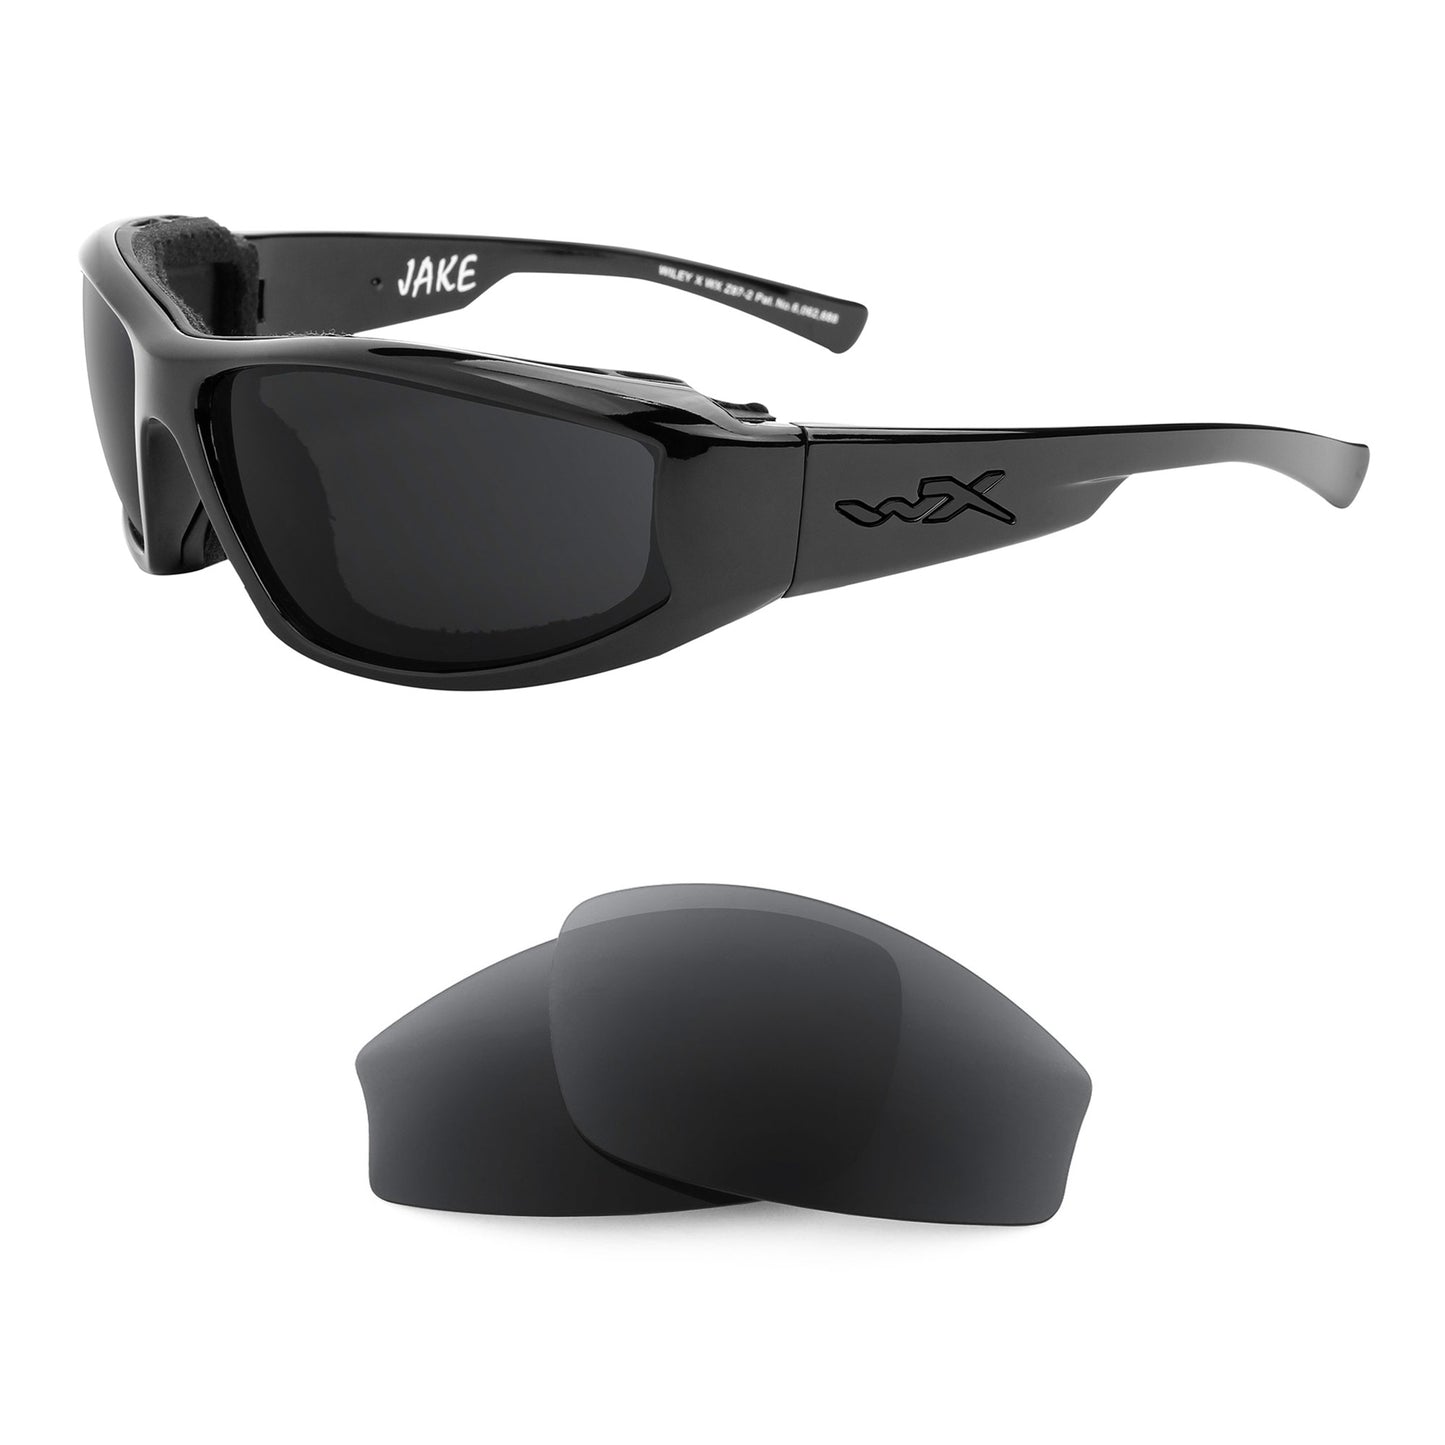 Wiley X Jake sunglasses with replacement lenses